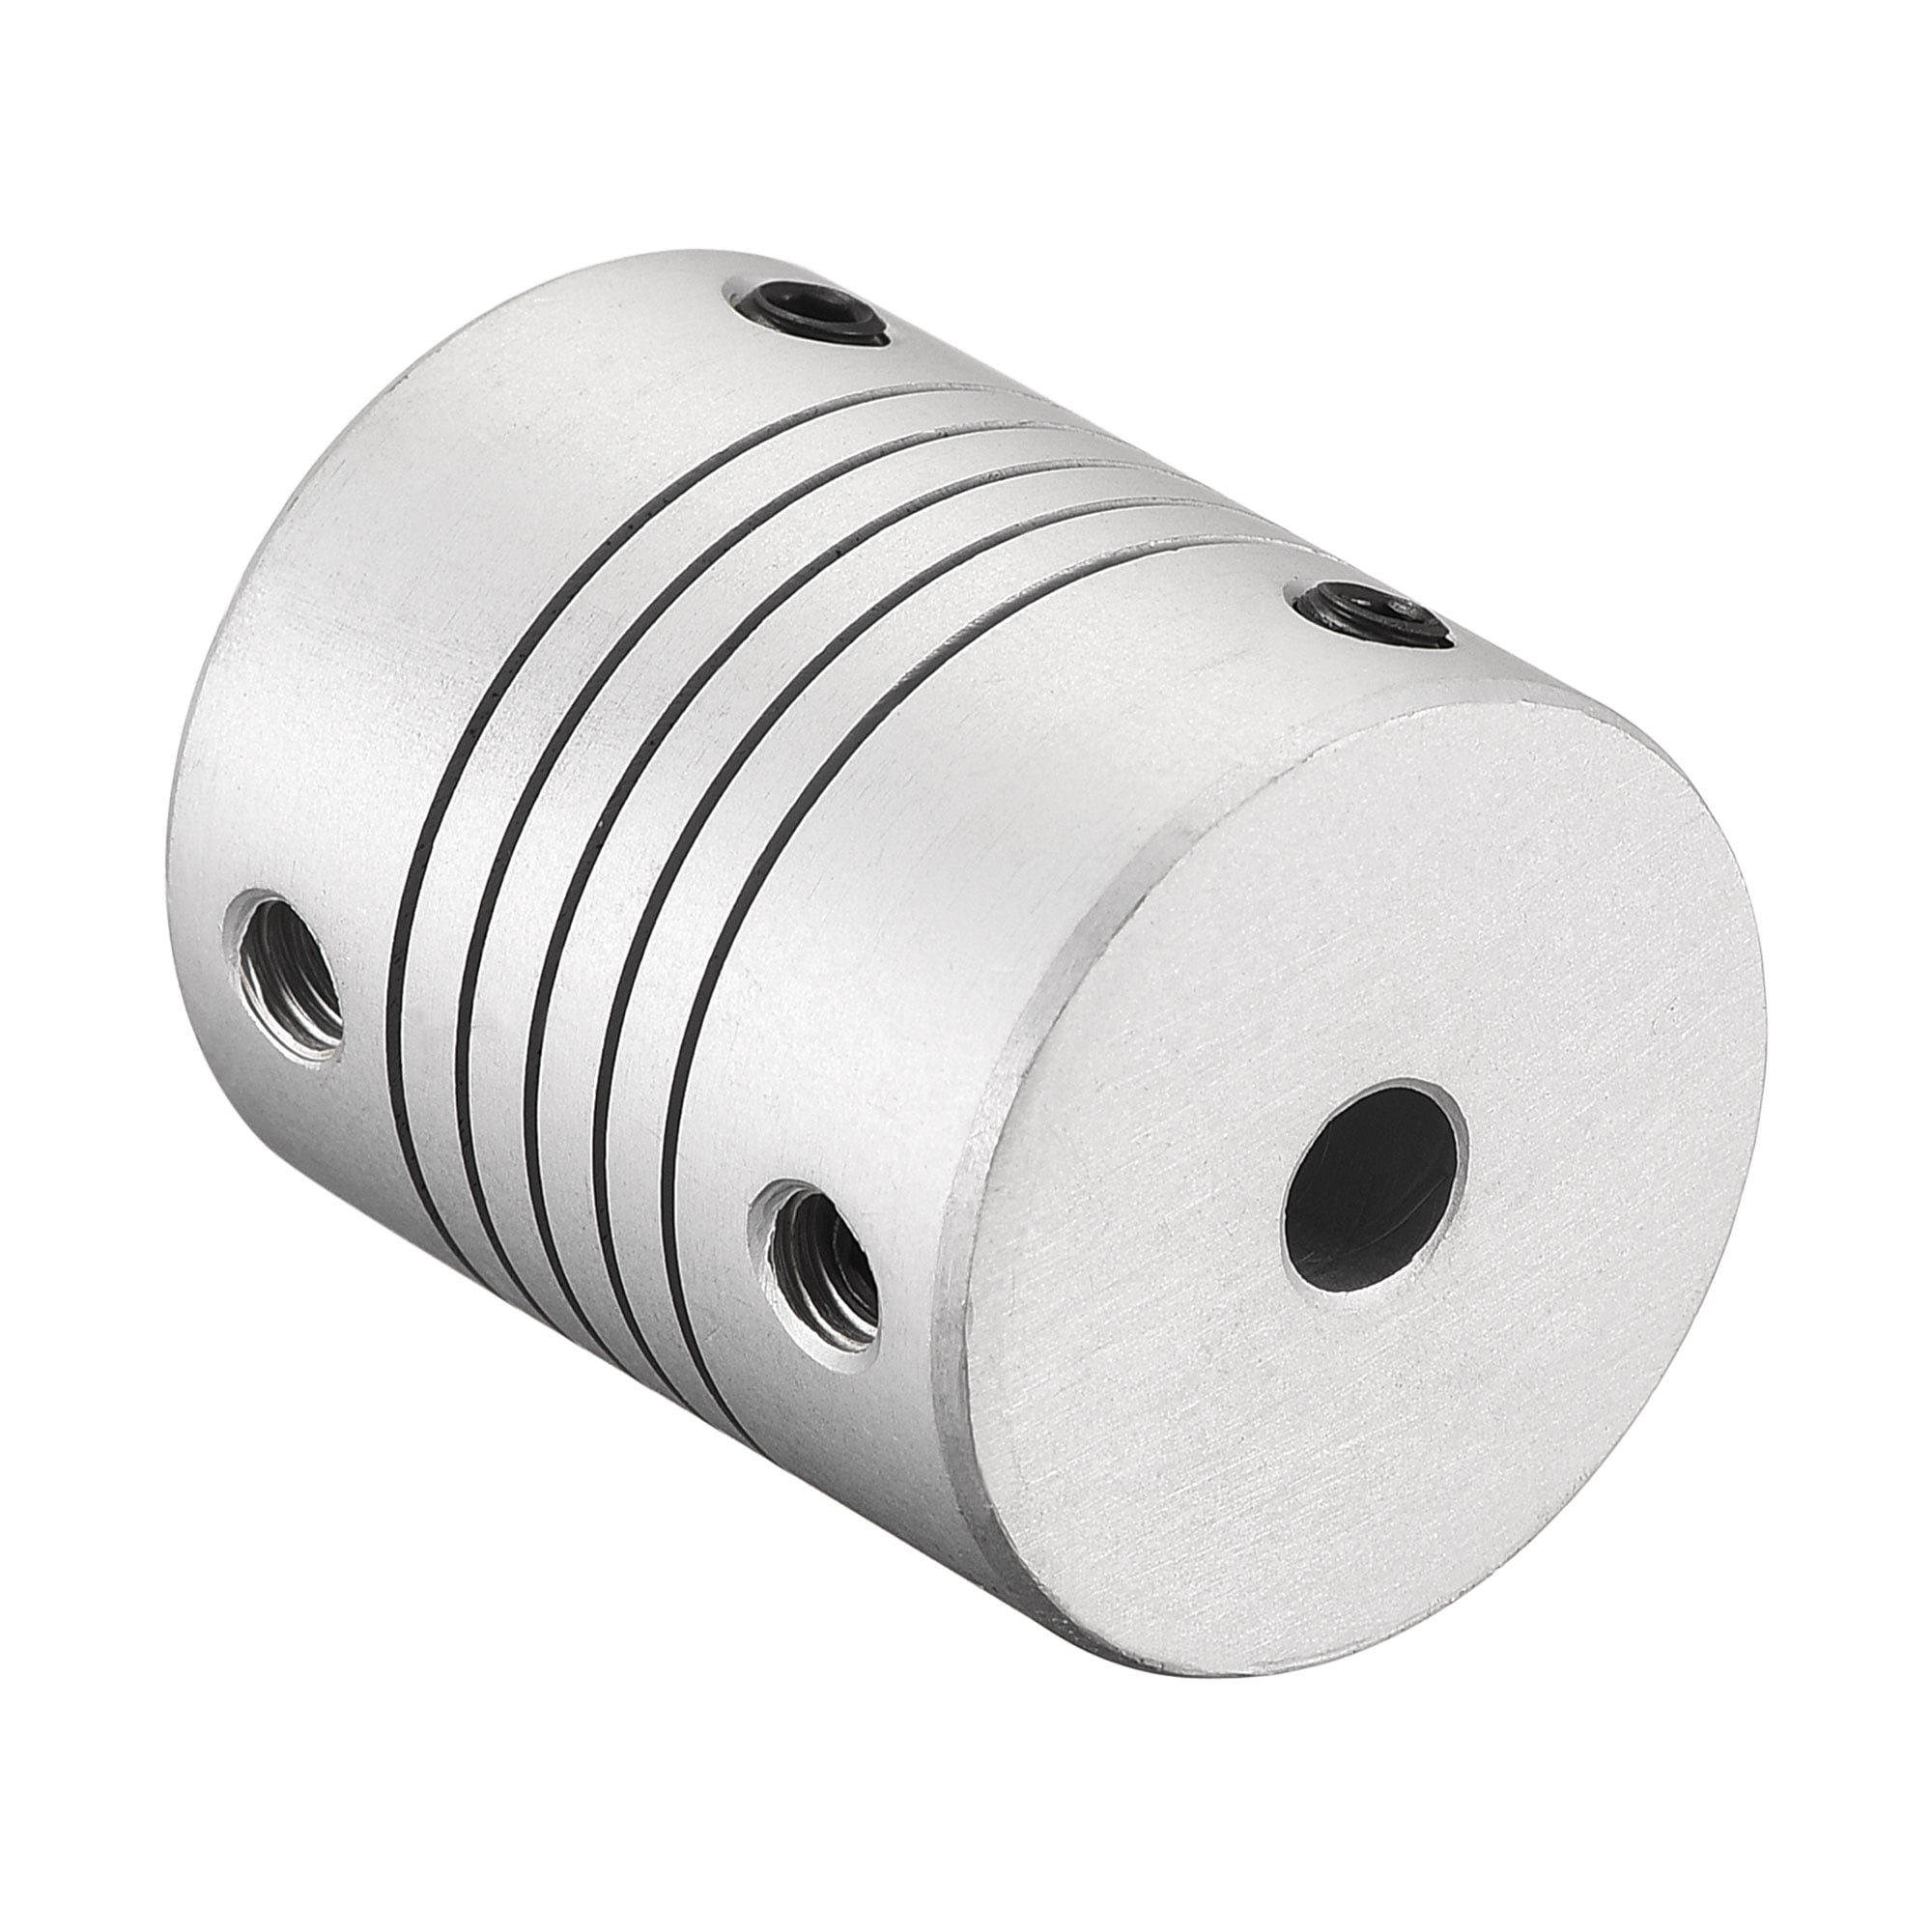 6.35mm to 6.35mm Aluminum Alloy Shaft Coupling Flexible Coupler Motor Connector Board L30xD25 Silver 